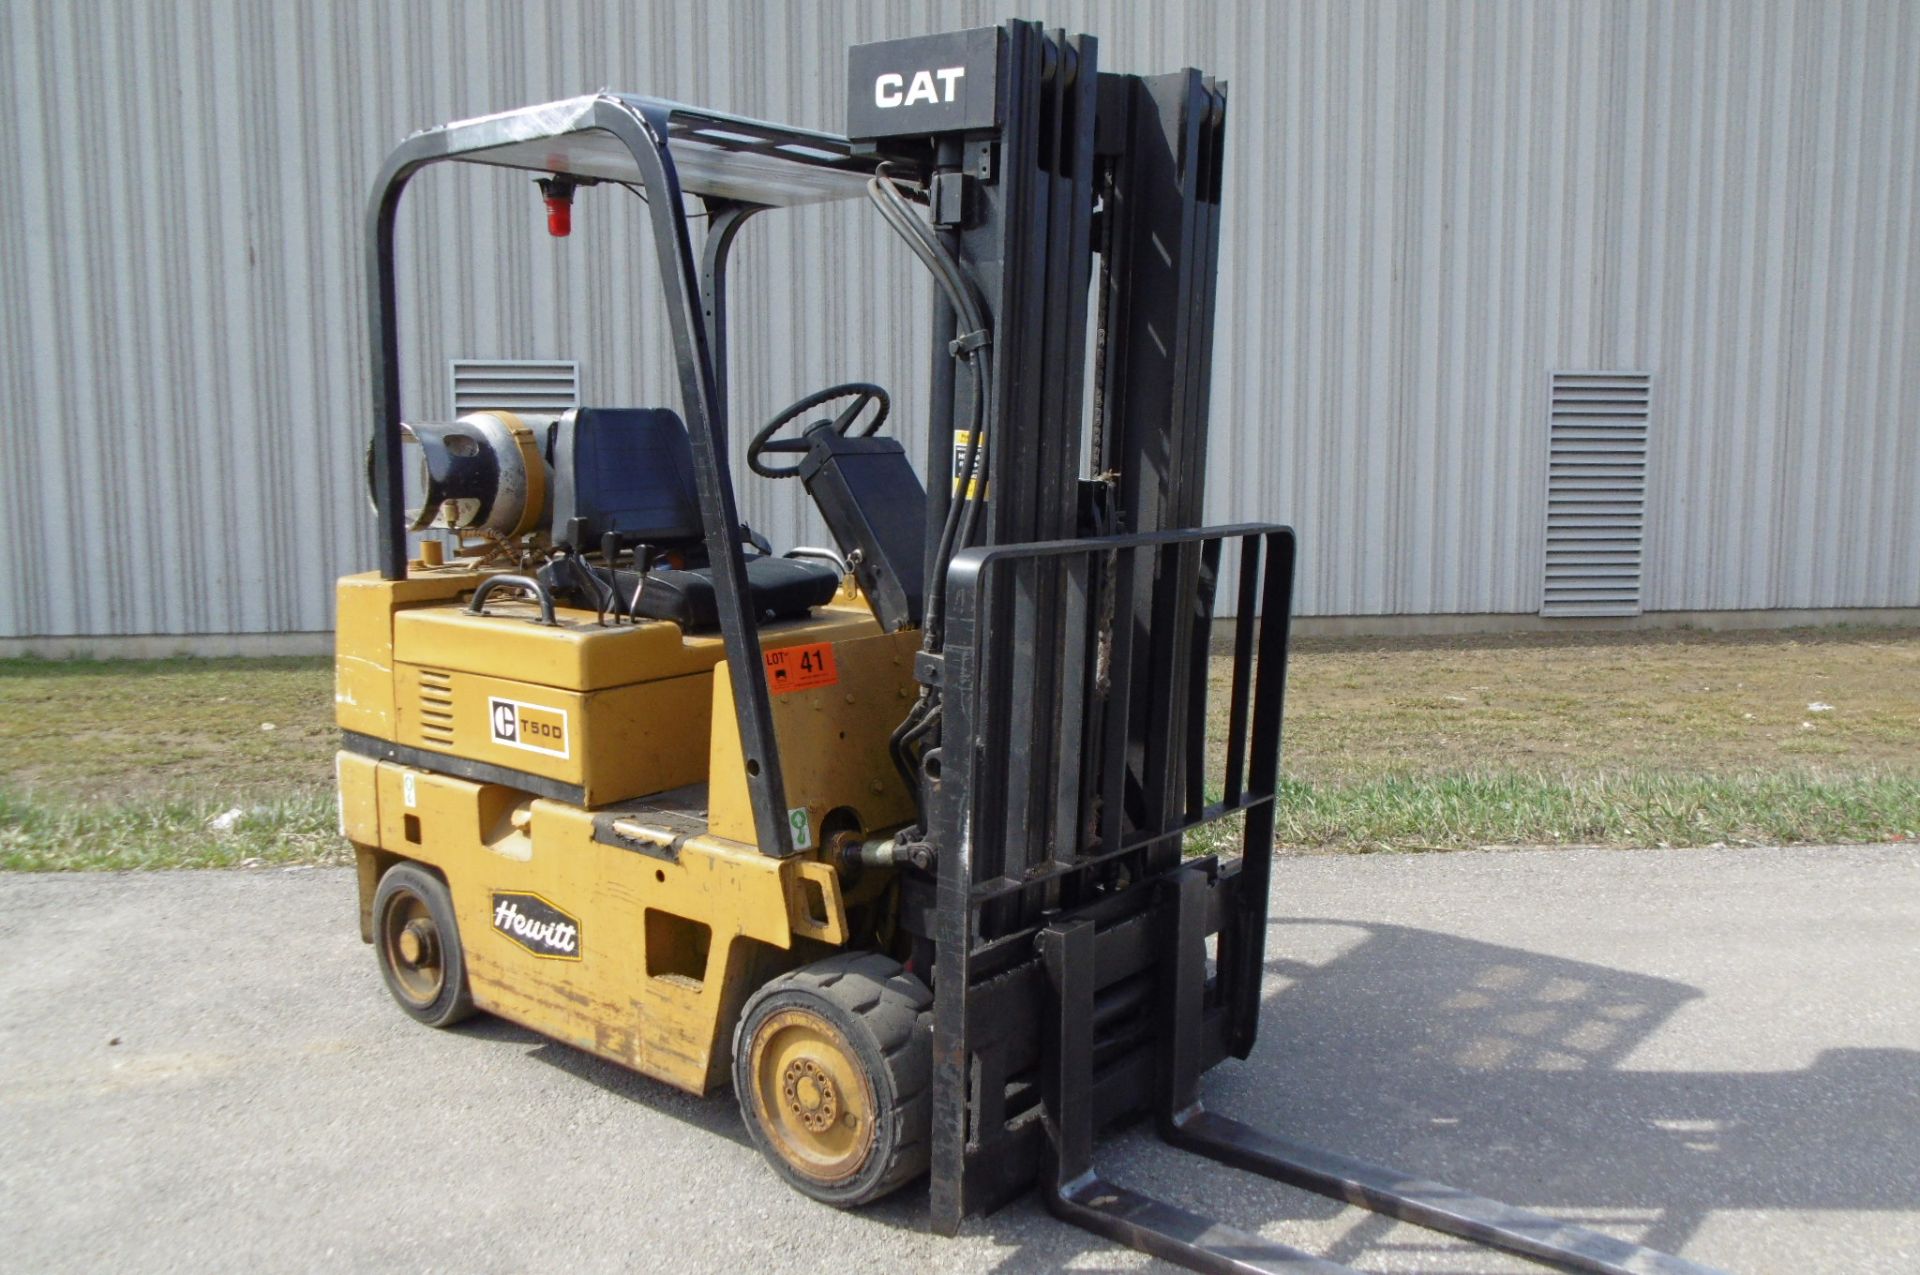 CATERPILLAR T50D 4,850 LB CAPACITY LPG FORKLIFT WITH 188" LIFT, 3 STAGE MAST, SIDE SHIFT, SOLID